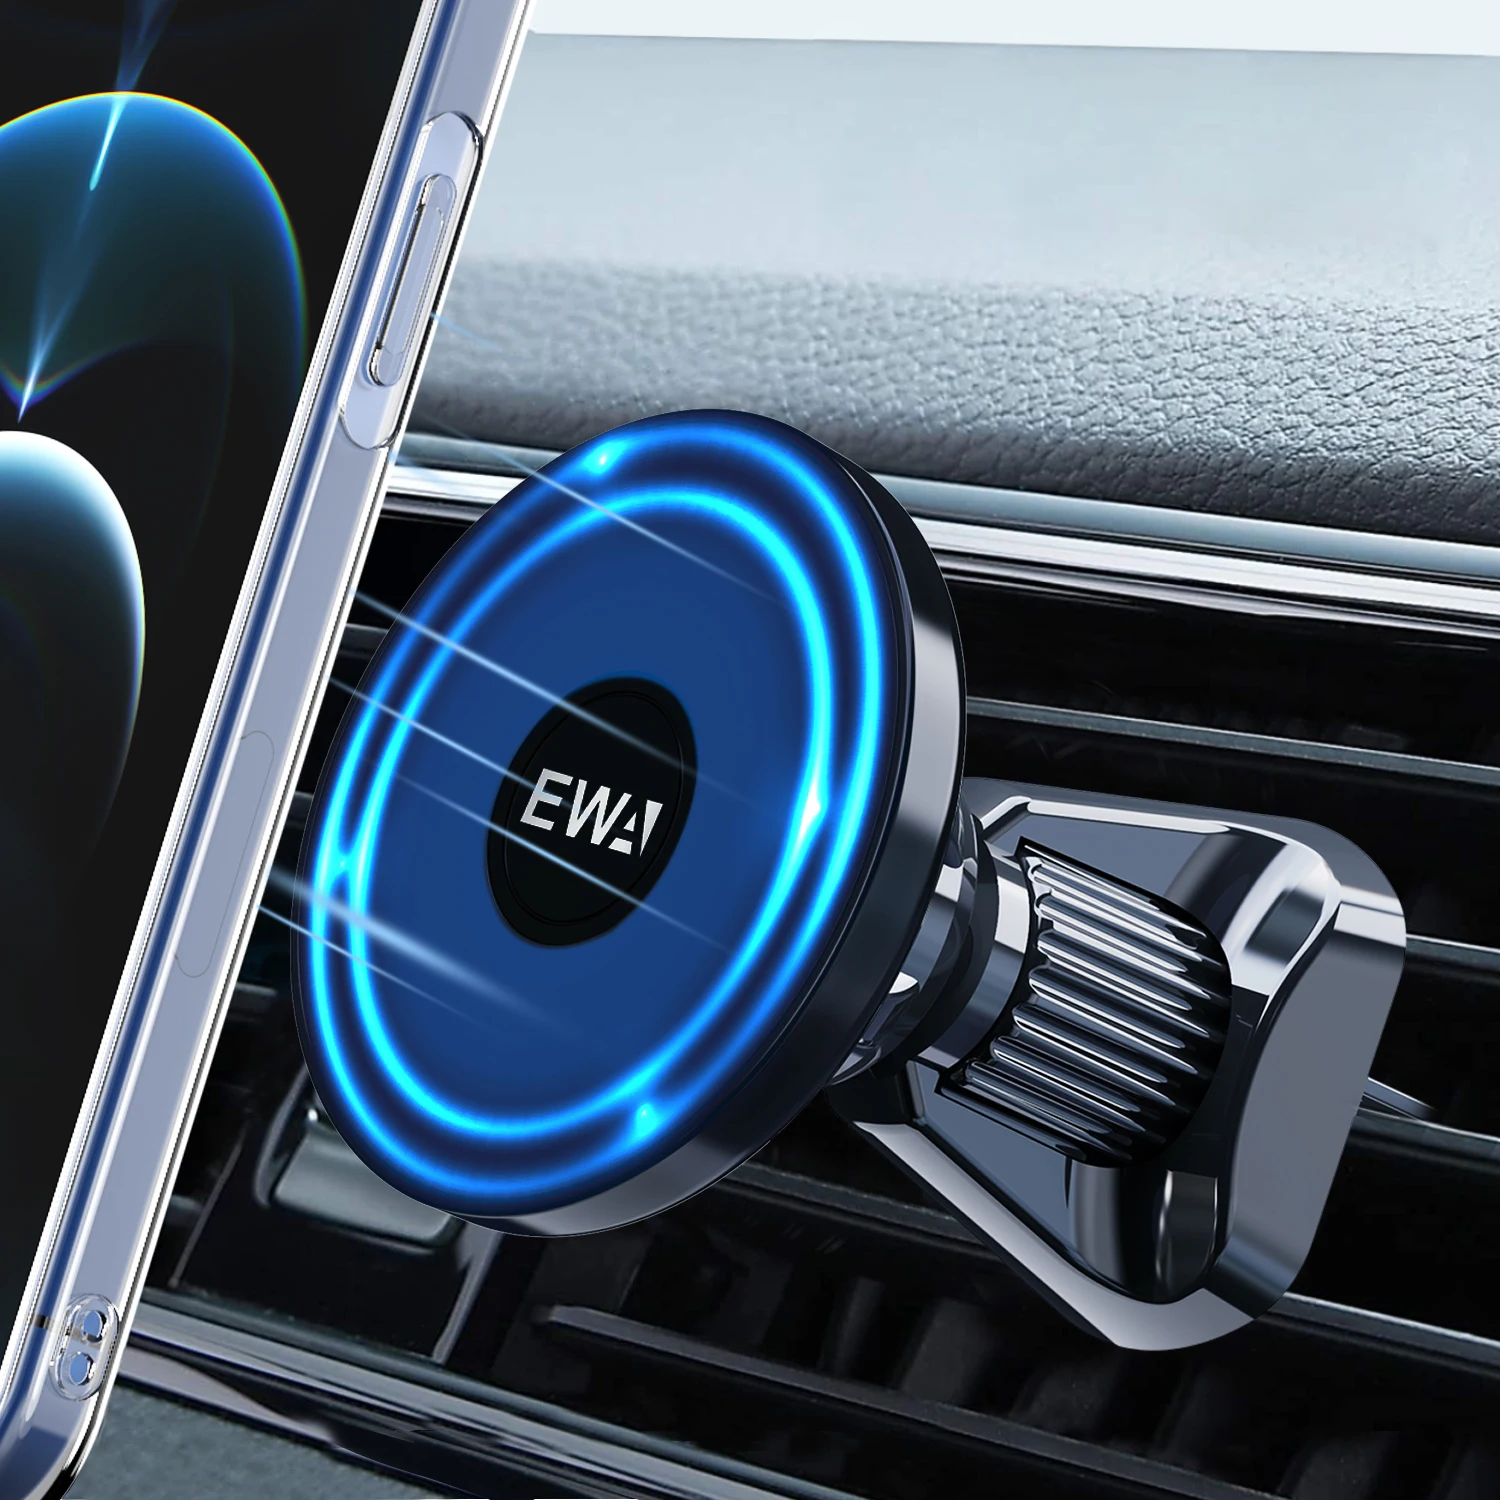 

2022 EWA Magnetic Car Mount Compatible with iPhone 12/13/ Pro/12 Max/12 Mini/Magsafe Case Strong Magnet Air Vent Phone Holder